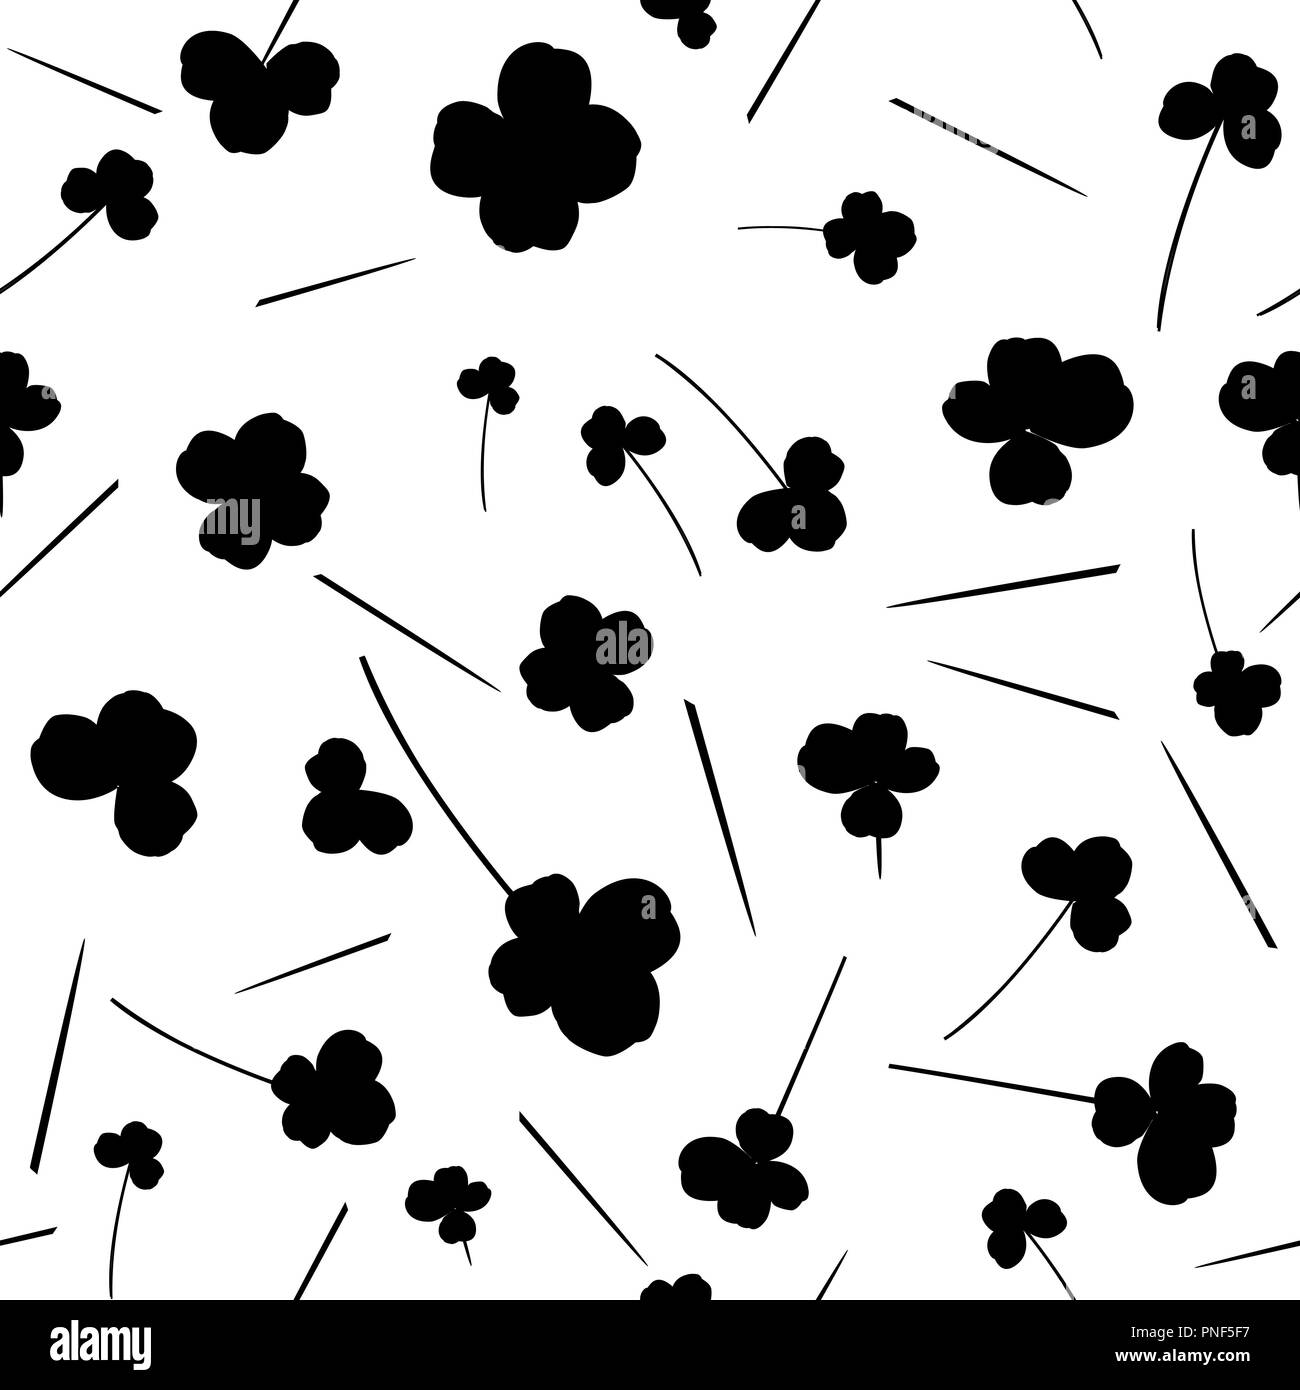 Clover leaf pattern seamless in simple style vector illustration. Black clover silhouettes Stock Vector